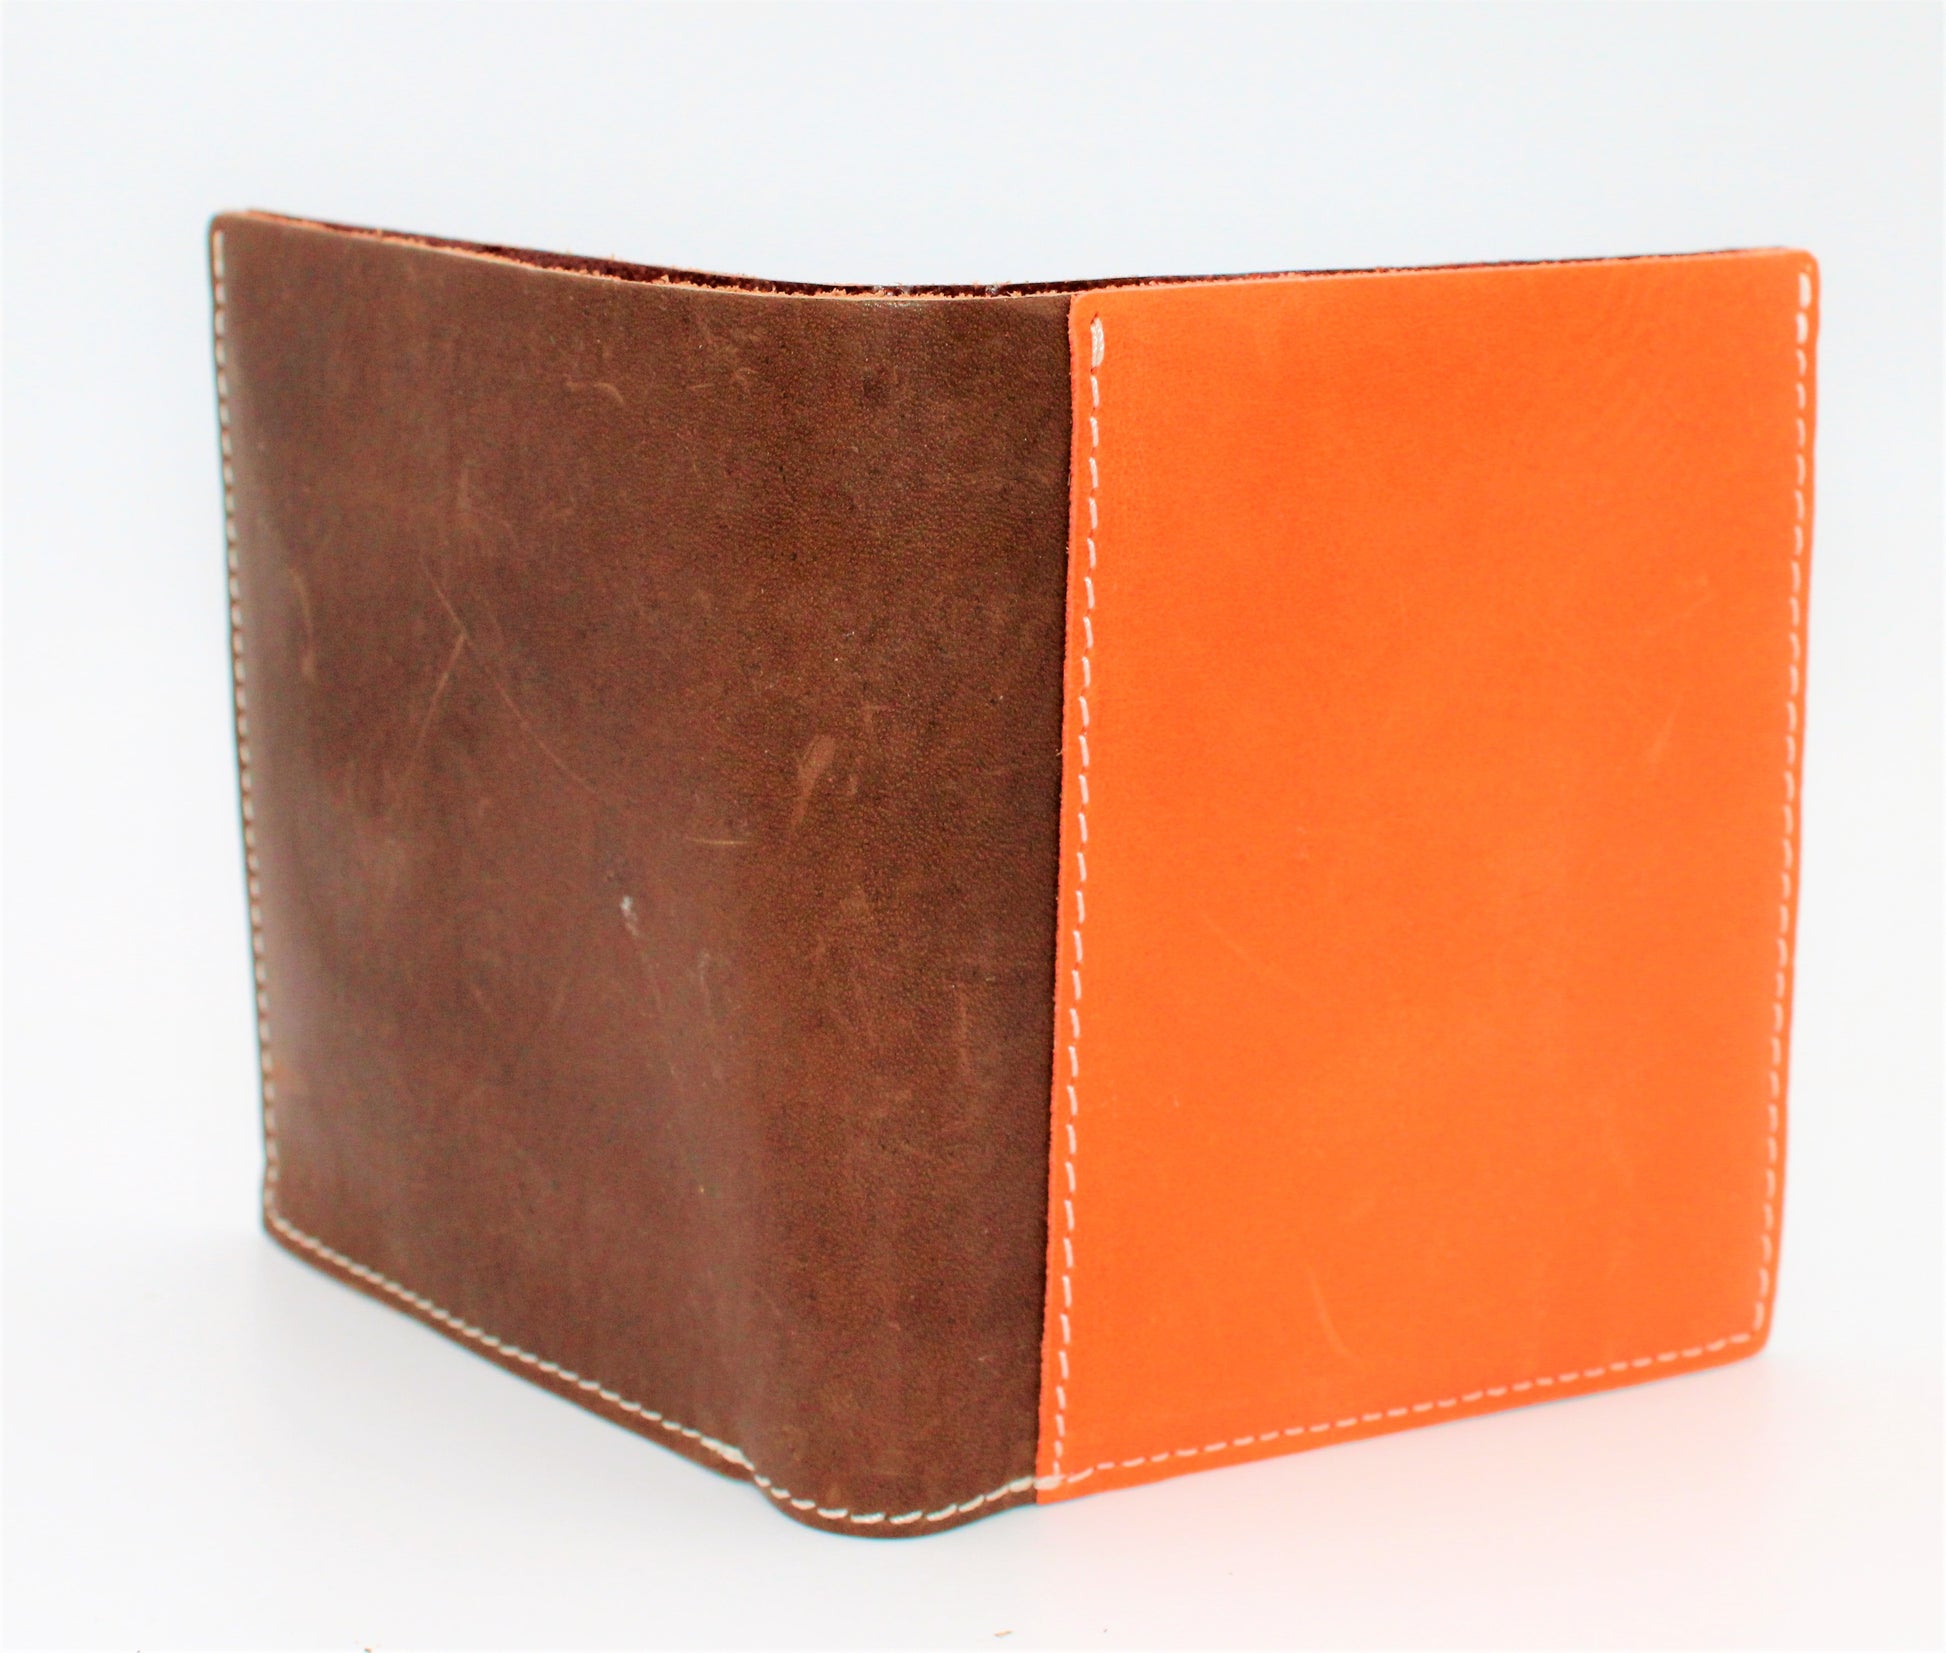 Outer cover of Hunter Plain Leather Wallet